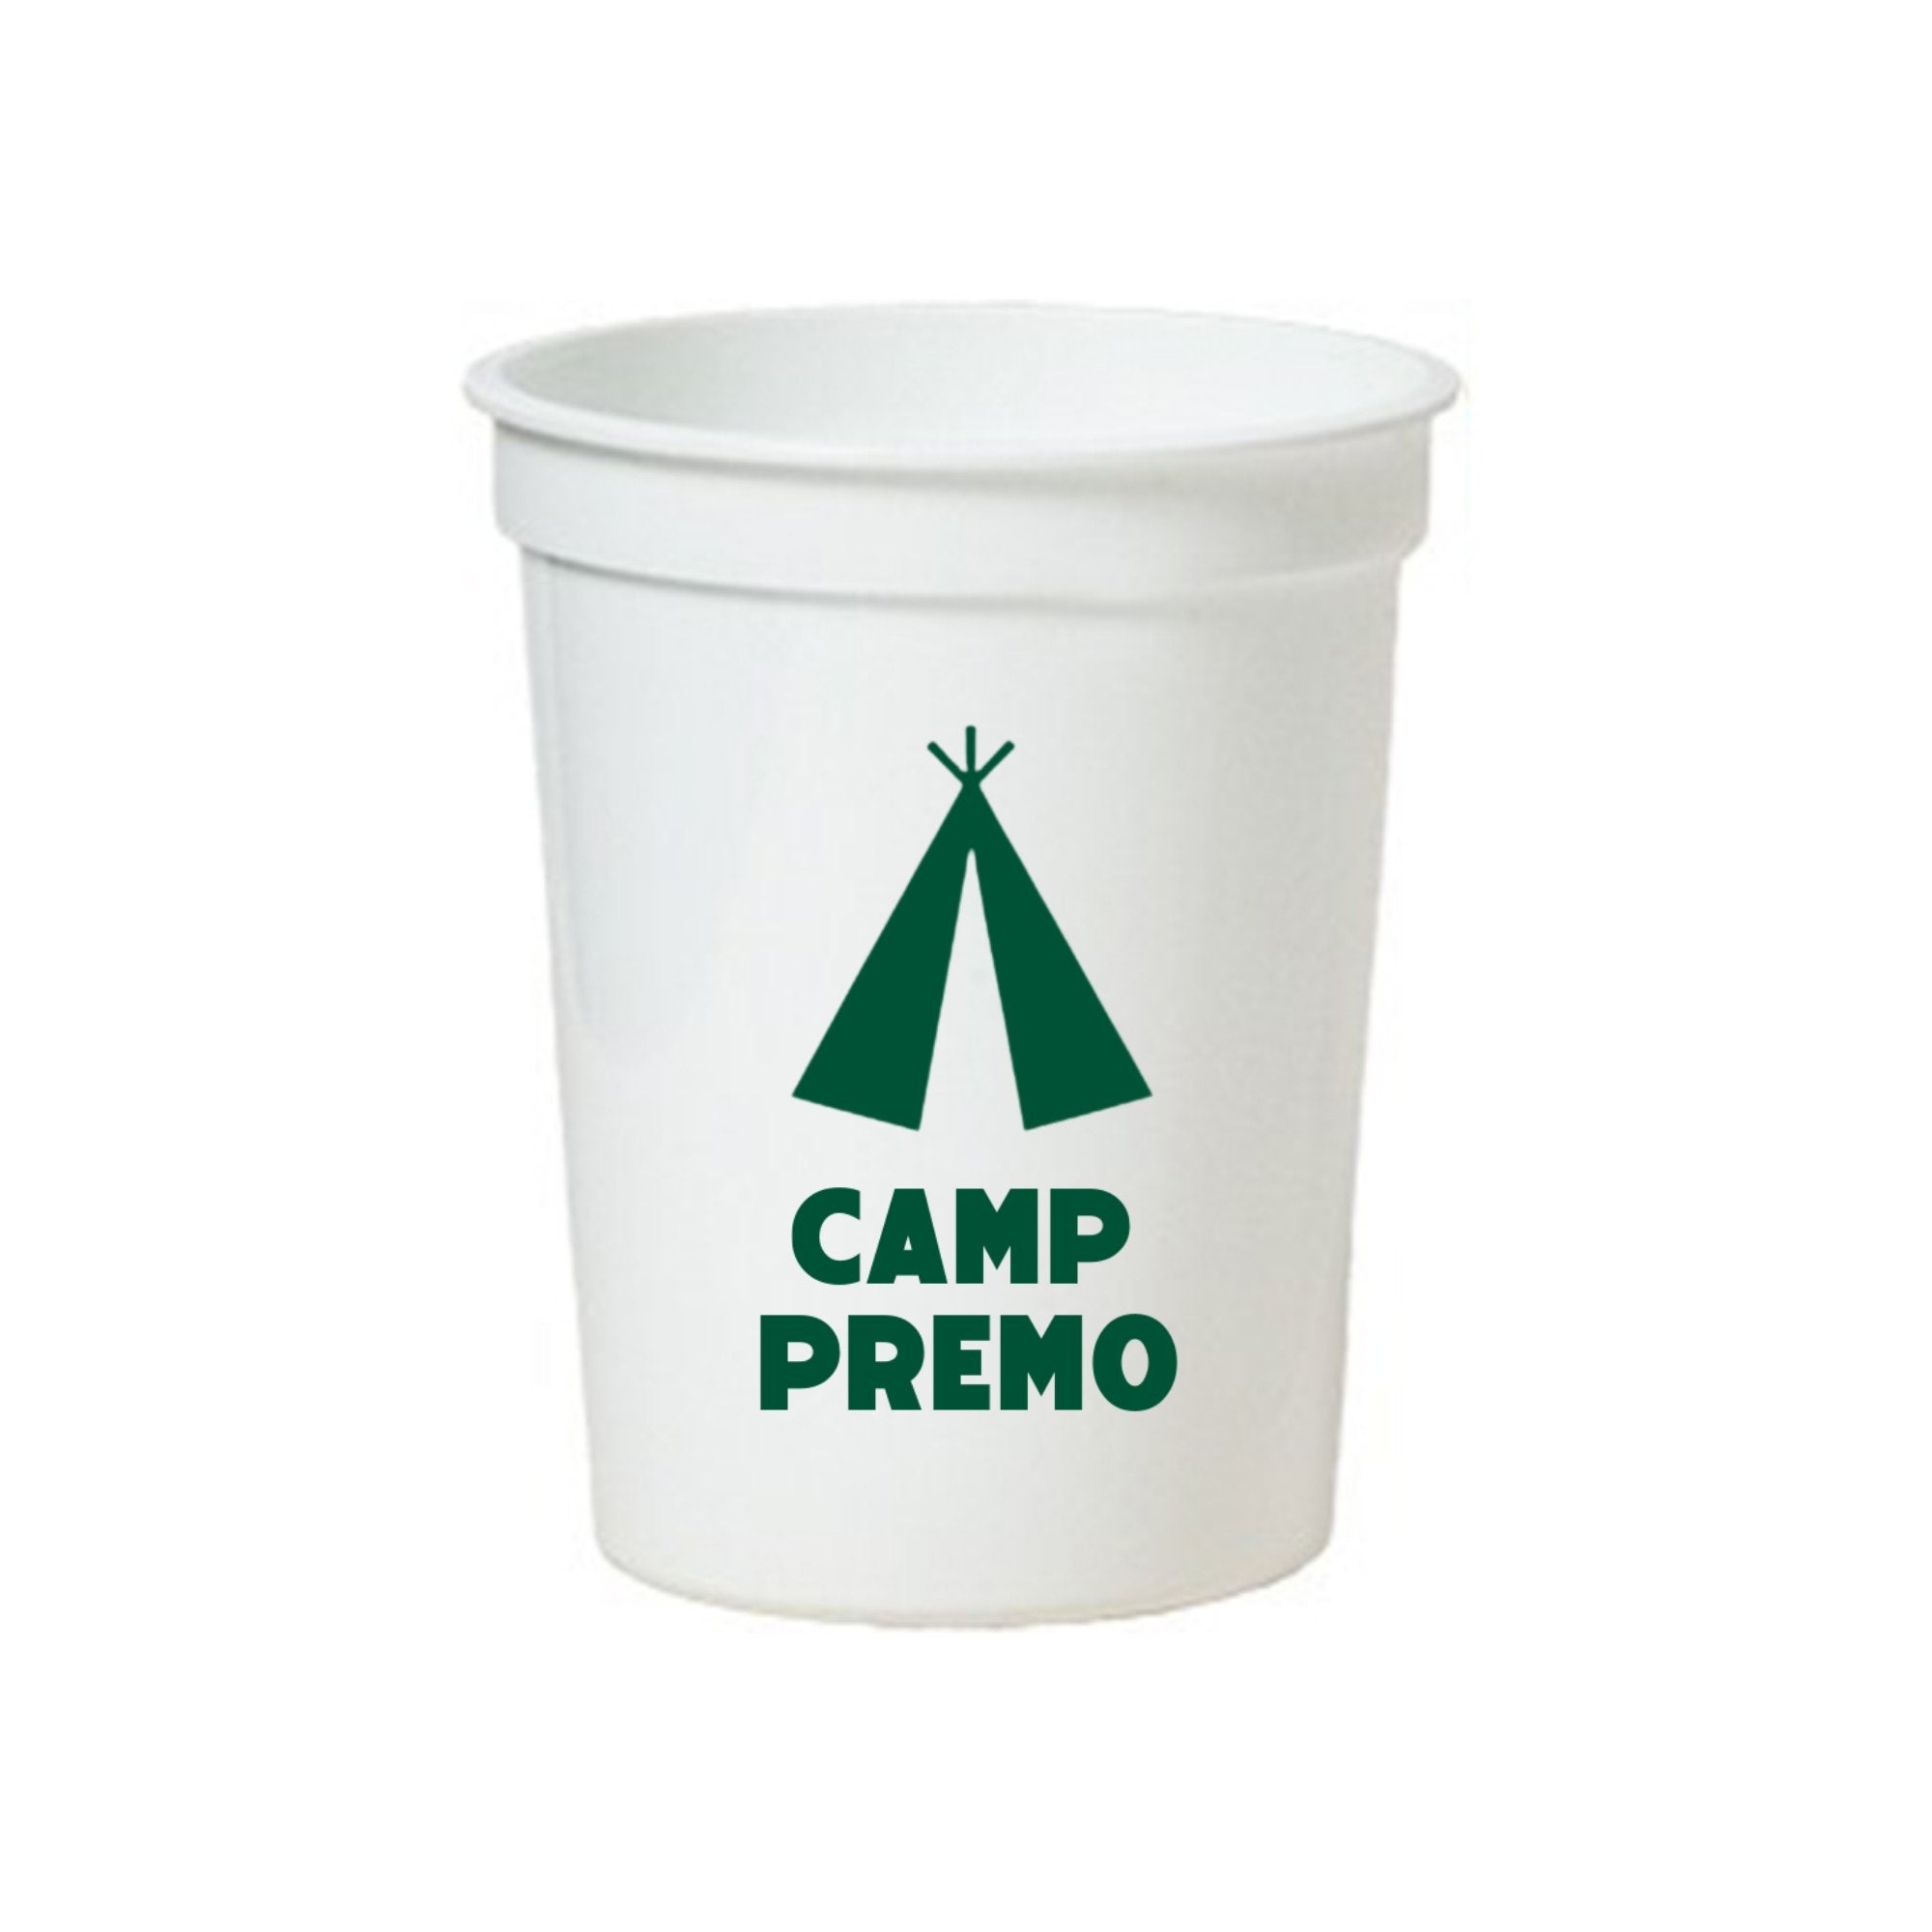 A white stadium cup reads "Camp Premo" with a tent icon